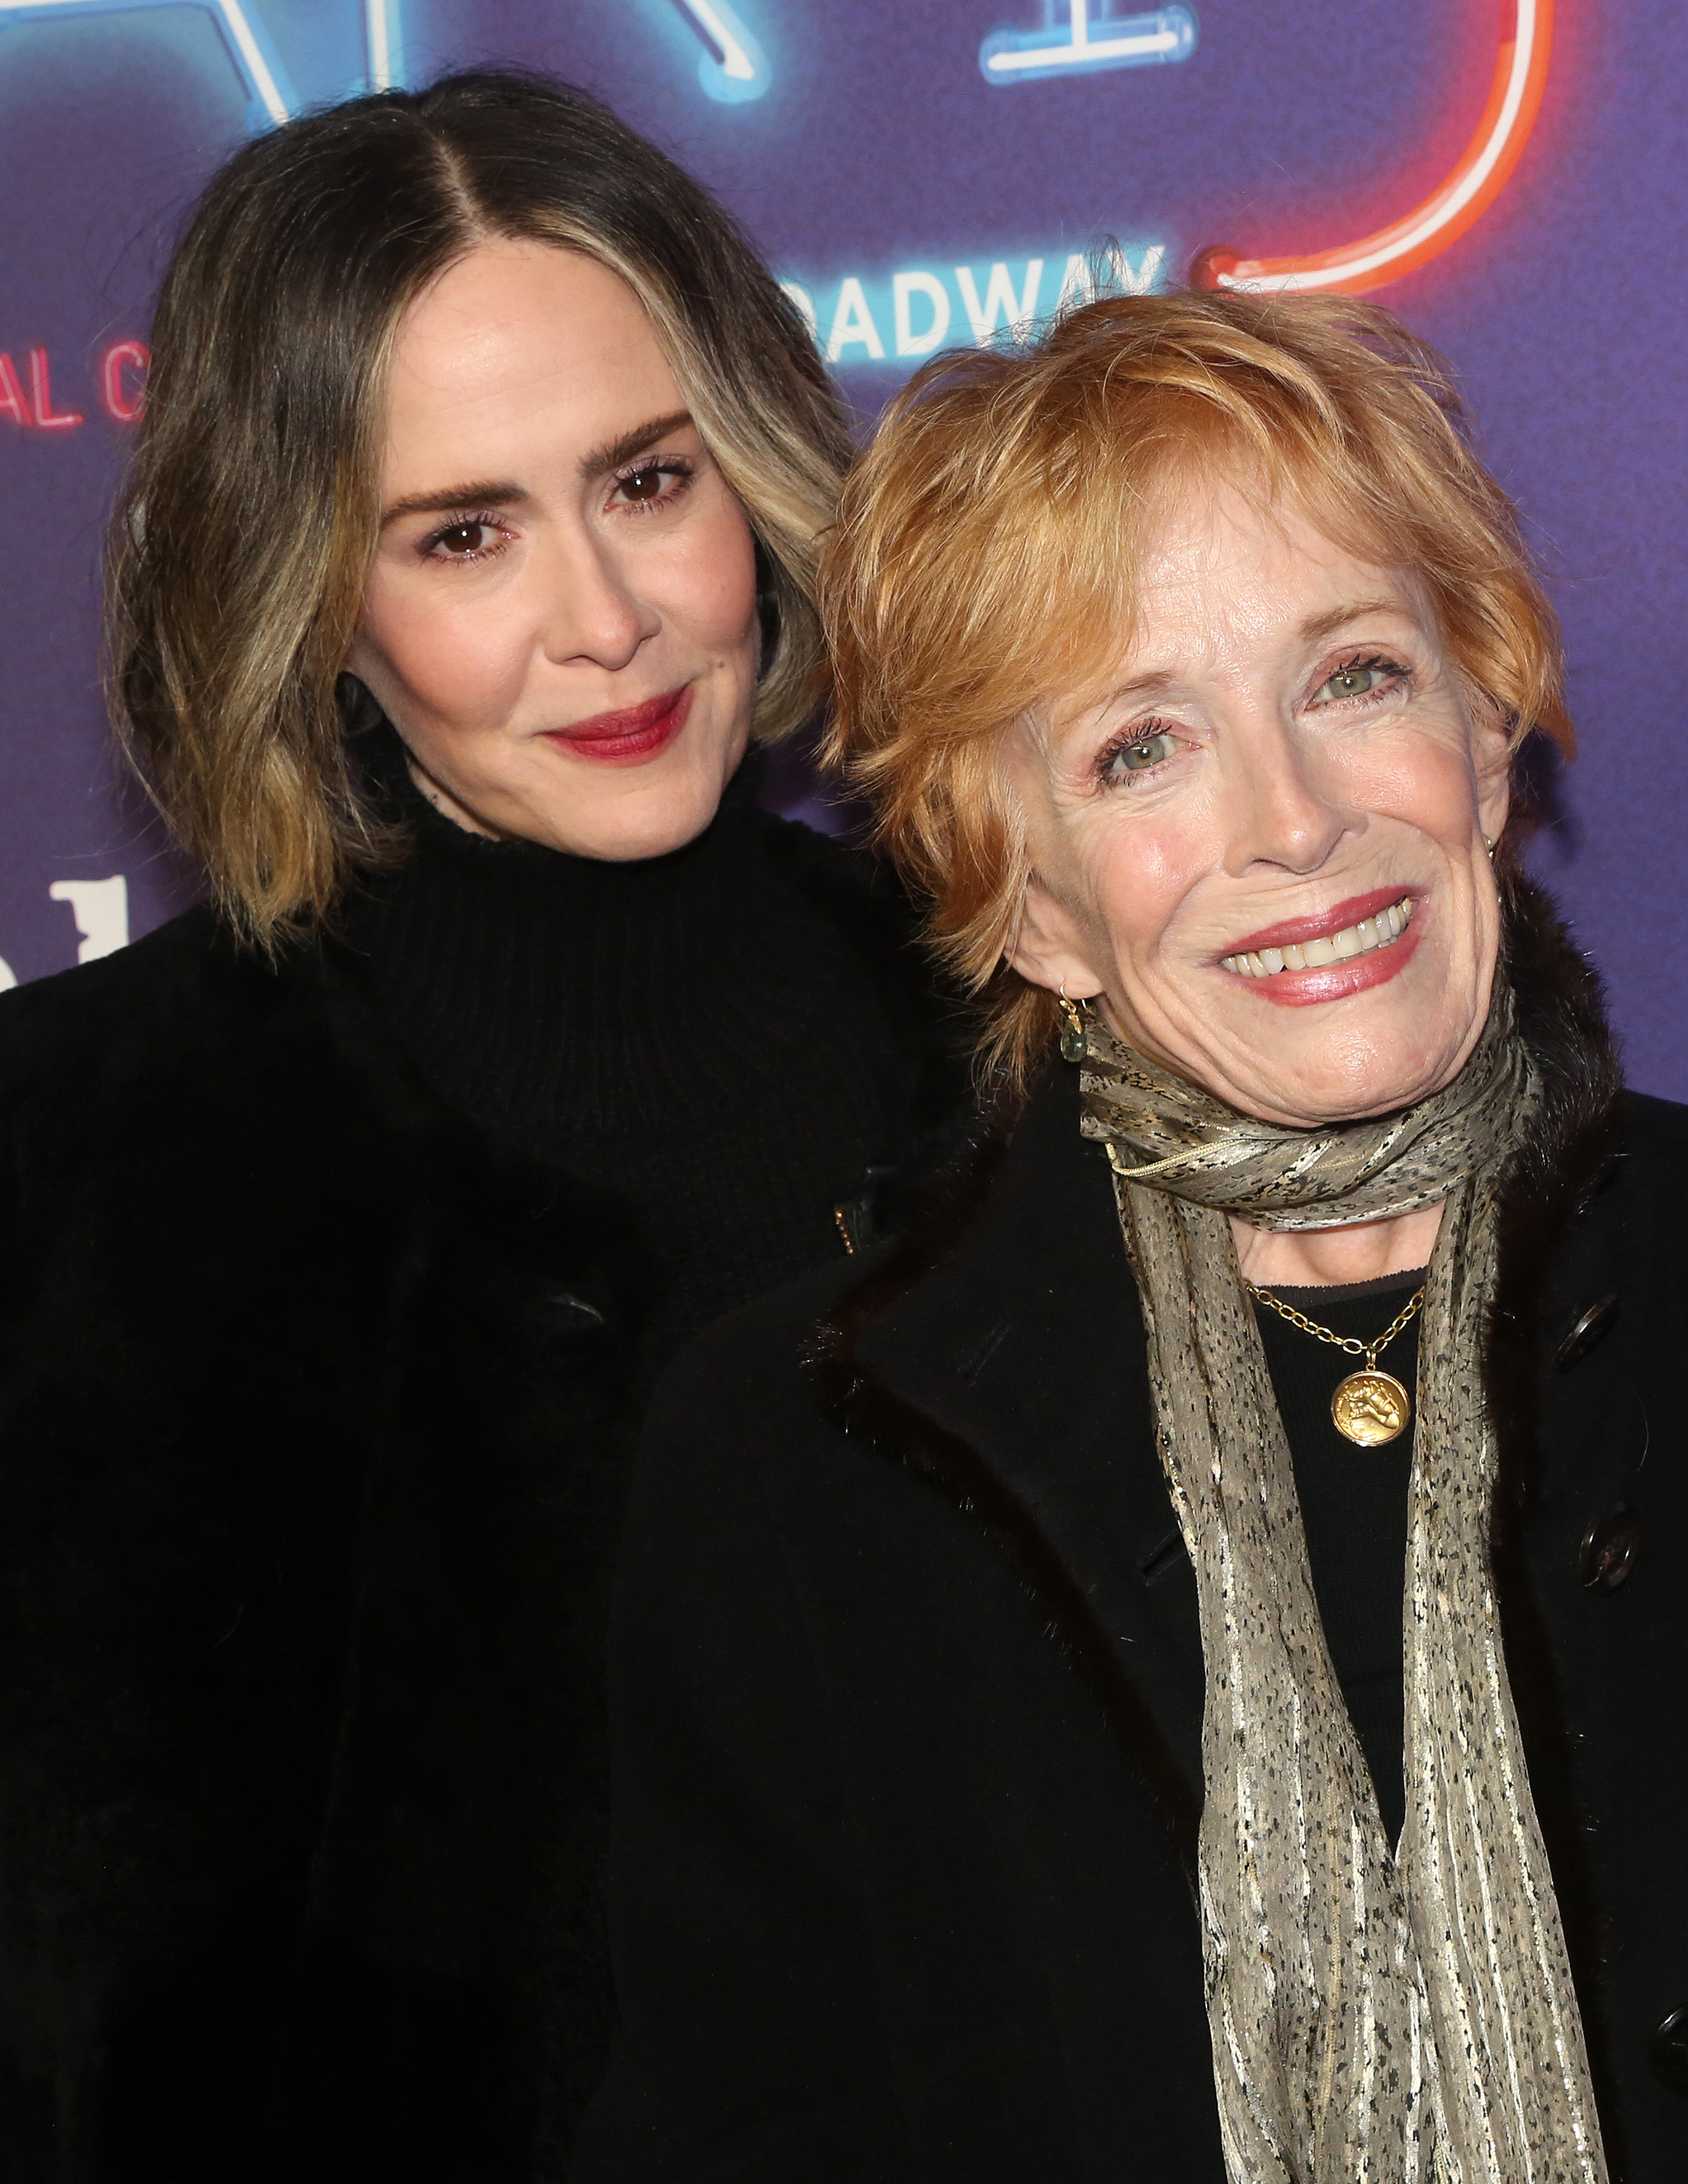 The "American Gothic" actress and Holland Taylor at the opening night for Stephen Sondheim's "Company" on Broadway on December 9, 2021, in New York City. | Source: Getty Images